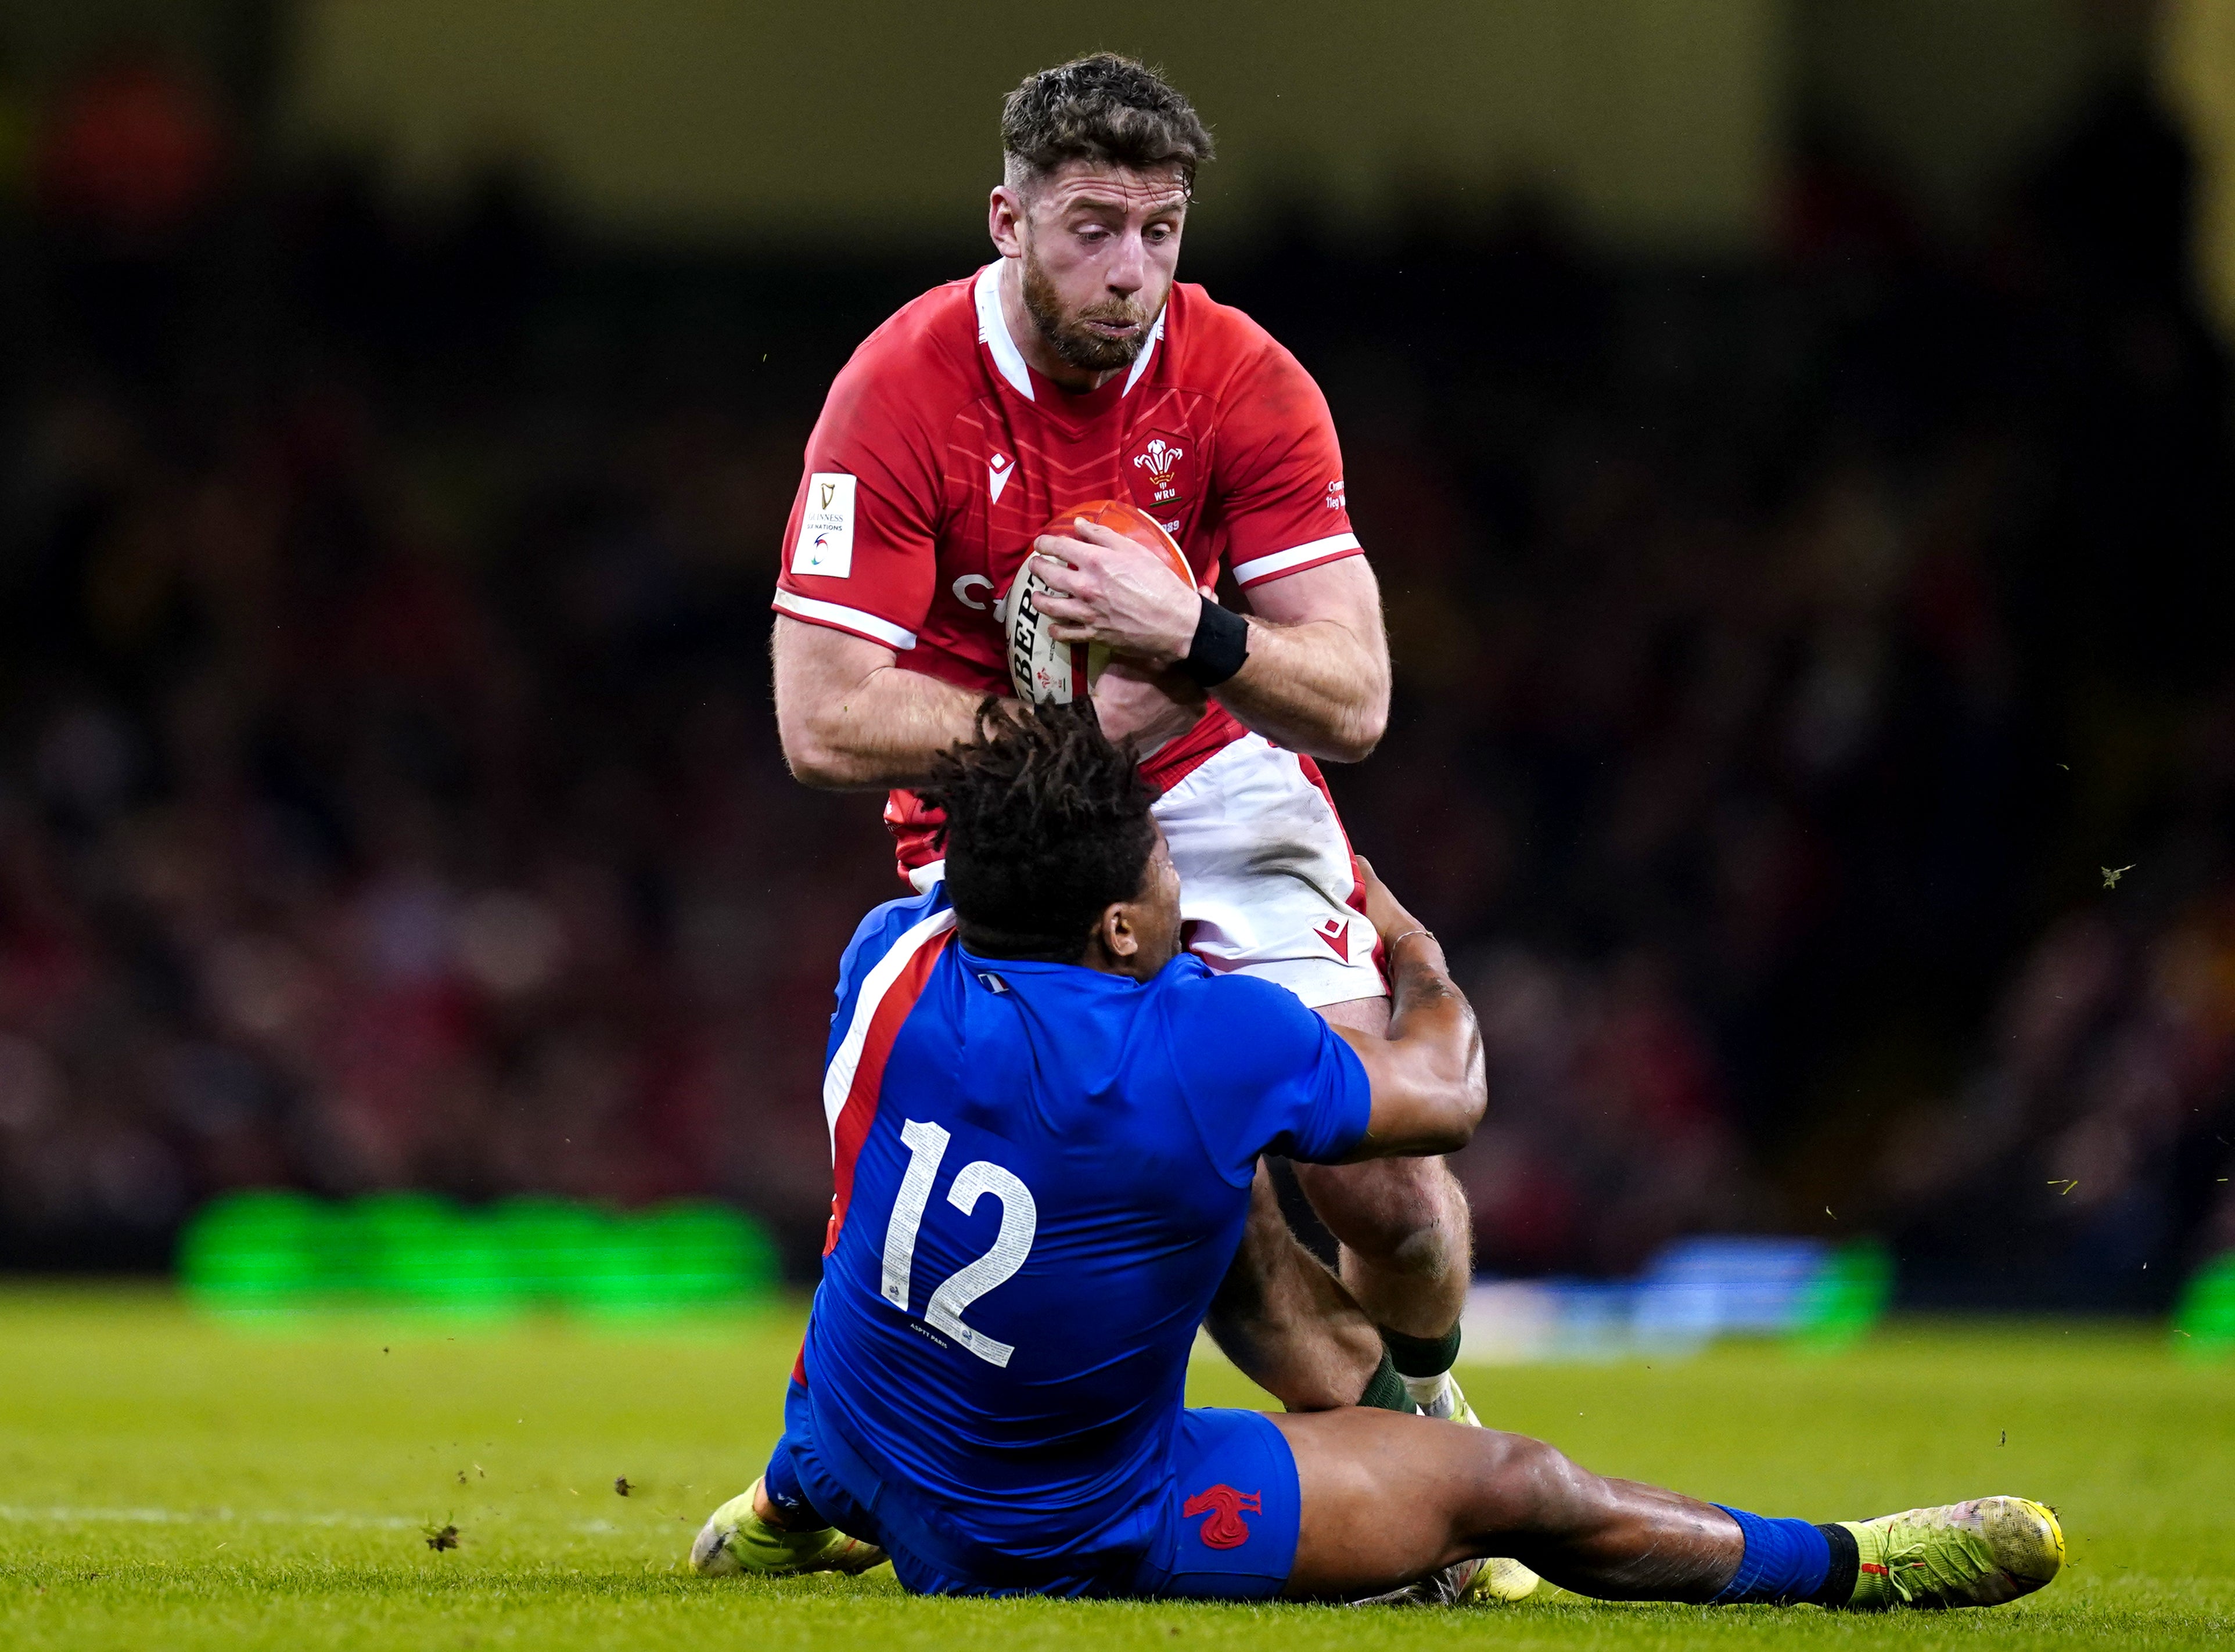 Wales wing Alex Cuthbert could start the second Test against South Africa (David Davies/PA)